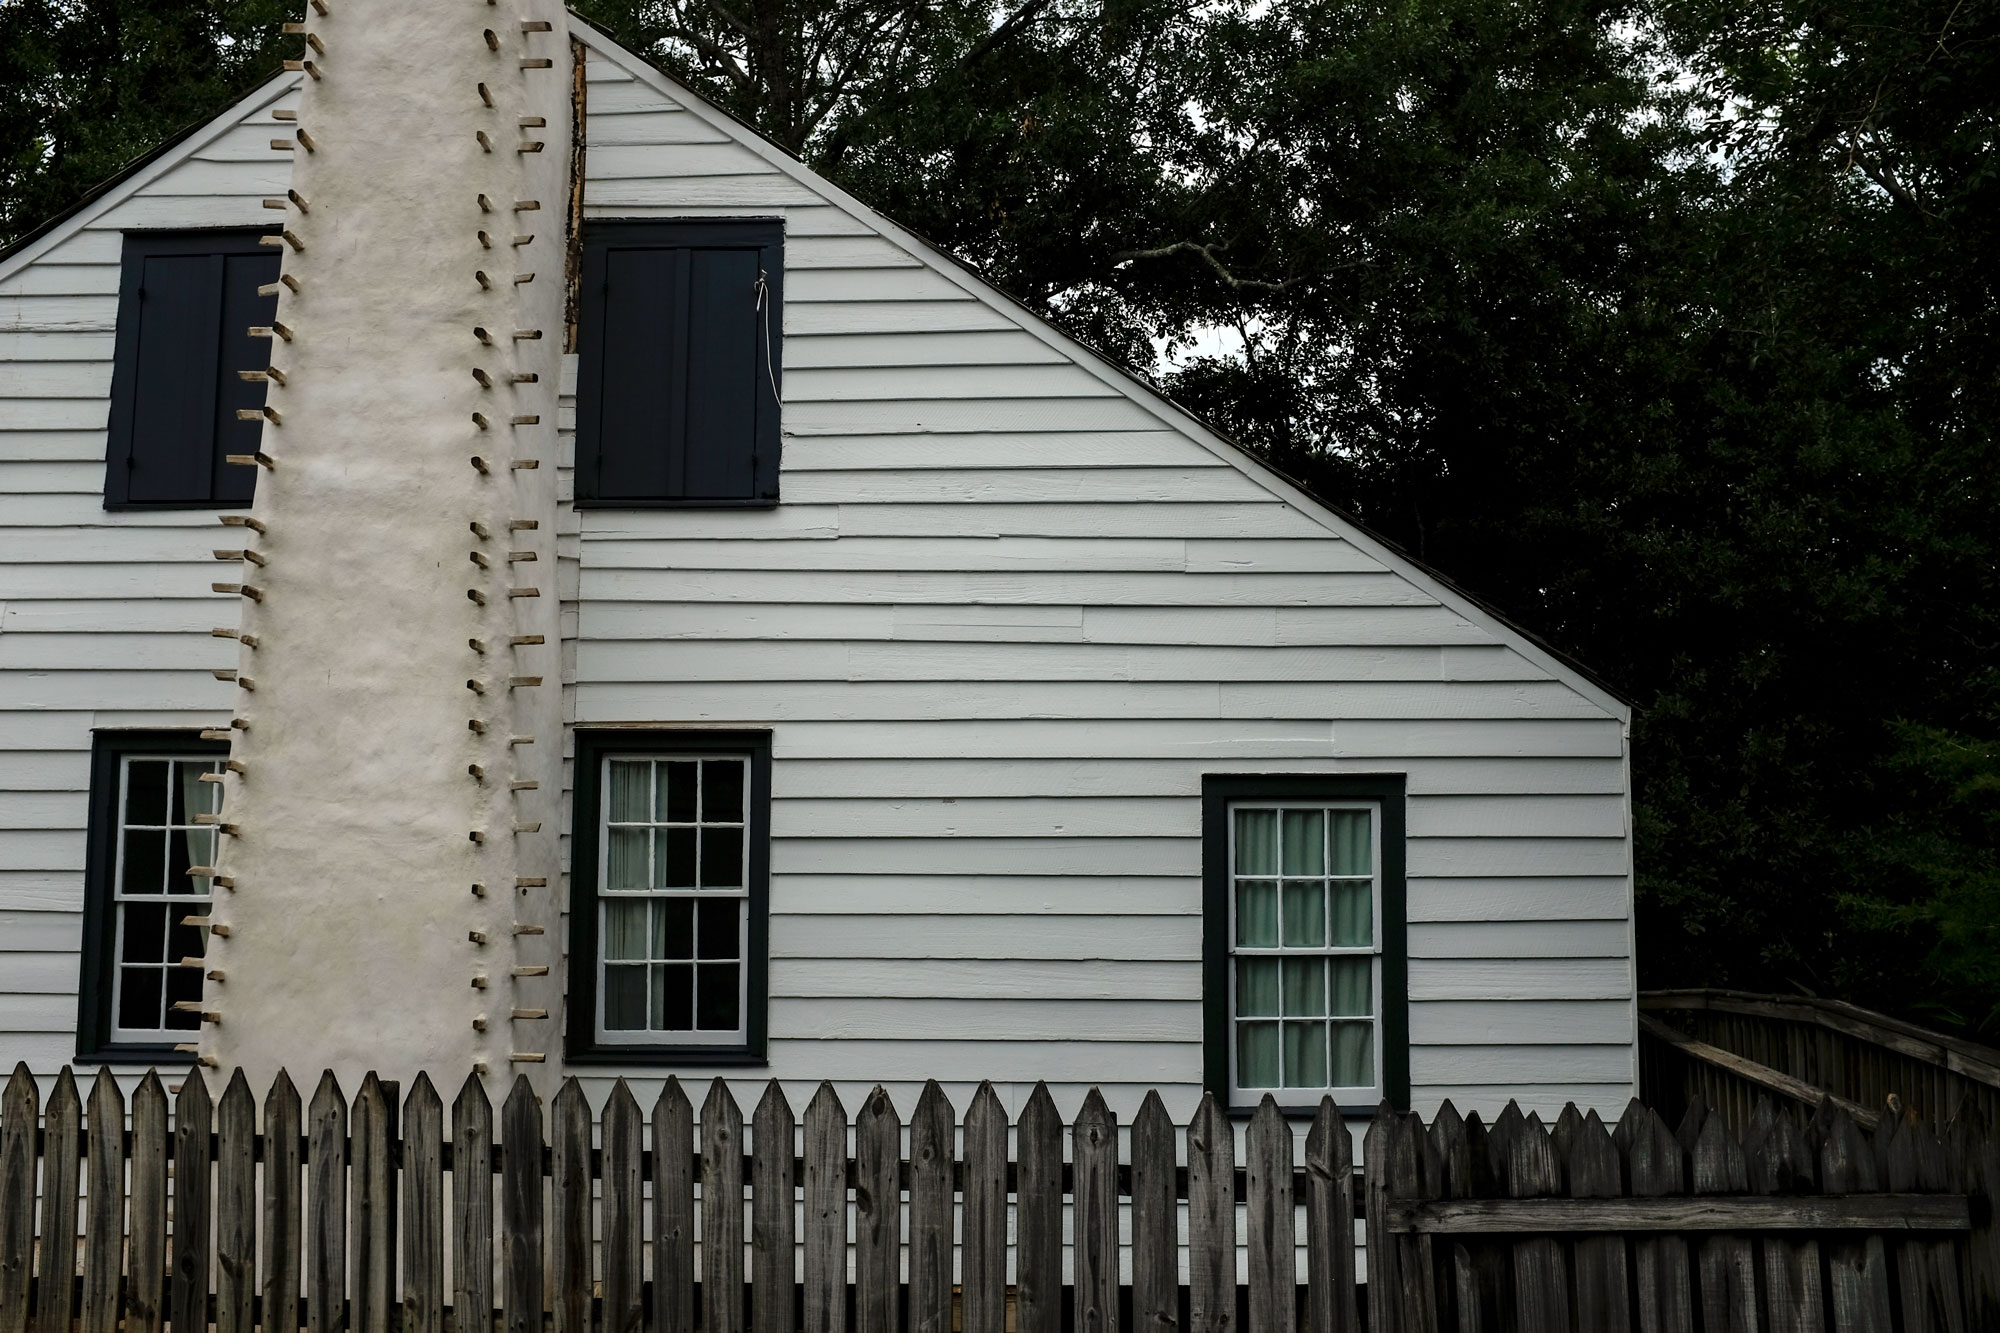 Side of a house at vermilionville. It is a white wooden house with a fireplace along the side and a wooden picket fence